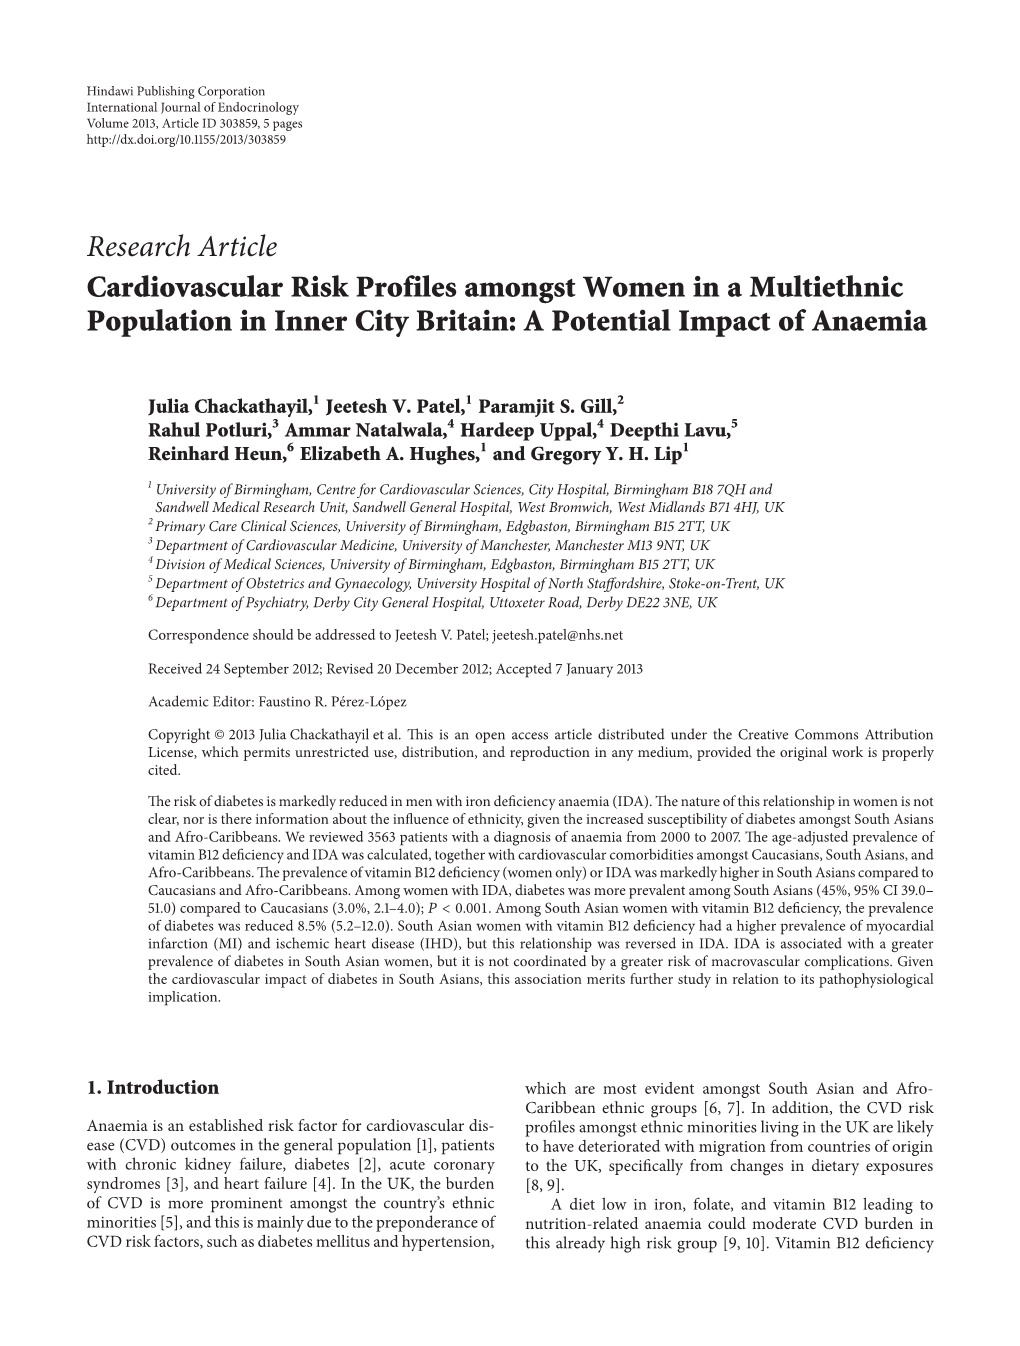 Research Article Cardiovascular Risk Profiles Amongst Women in a Multiethnic Population in Inner City Britain: a Potential Impact of Anaemia